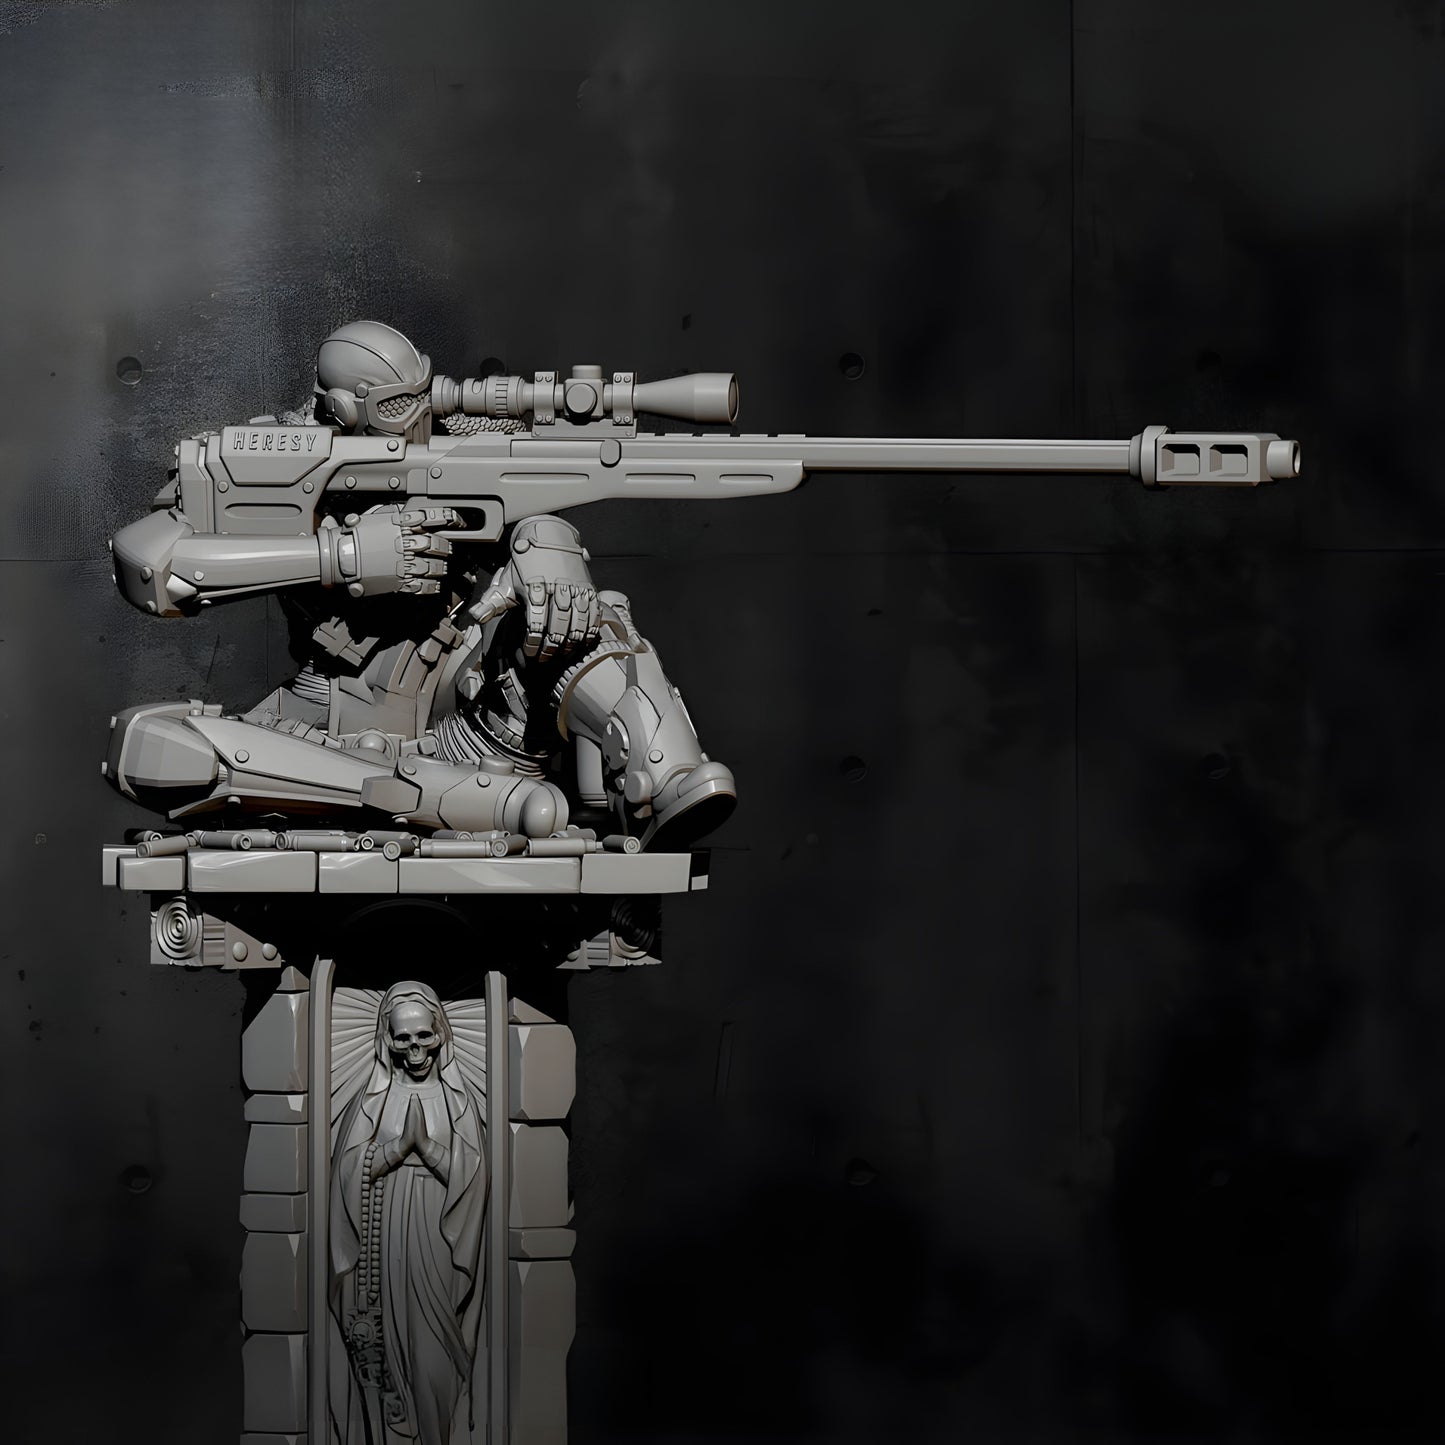 18+ Collector's 3D Printed Model: 50mm Resin model kits Sniper Resin Soldier self-assembled.